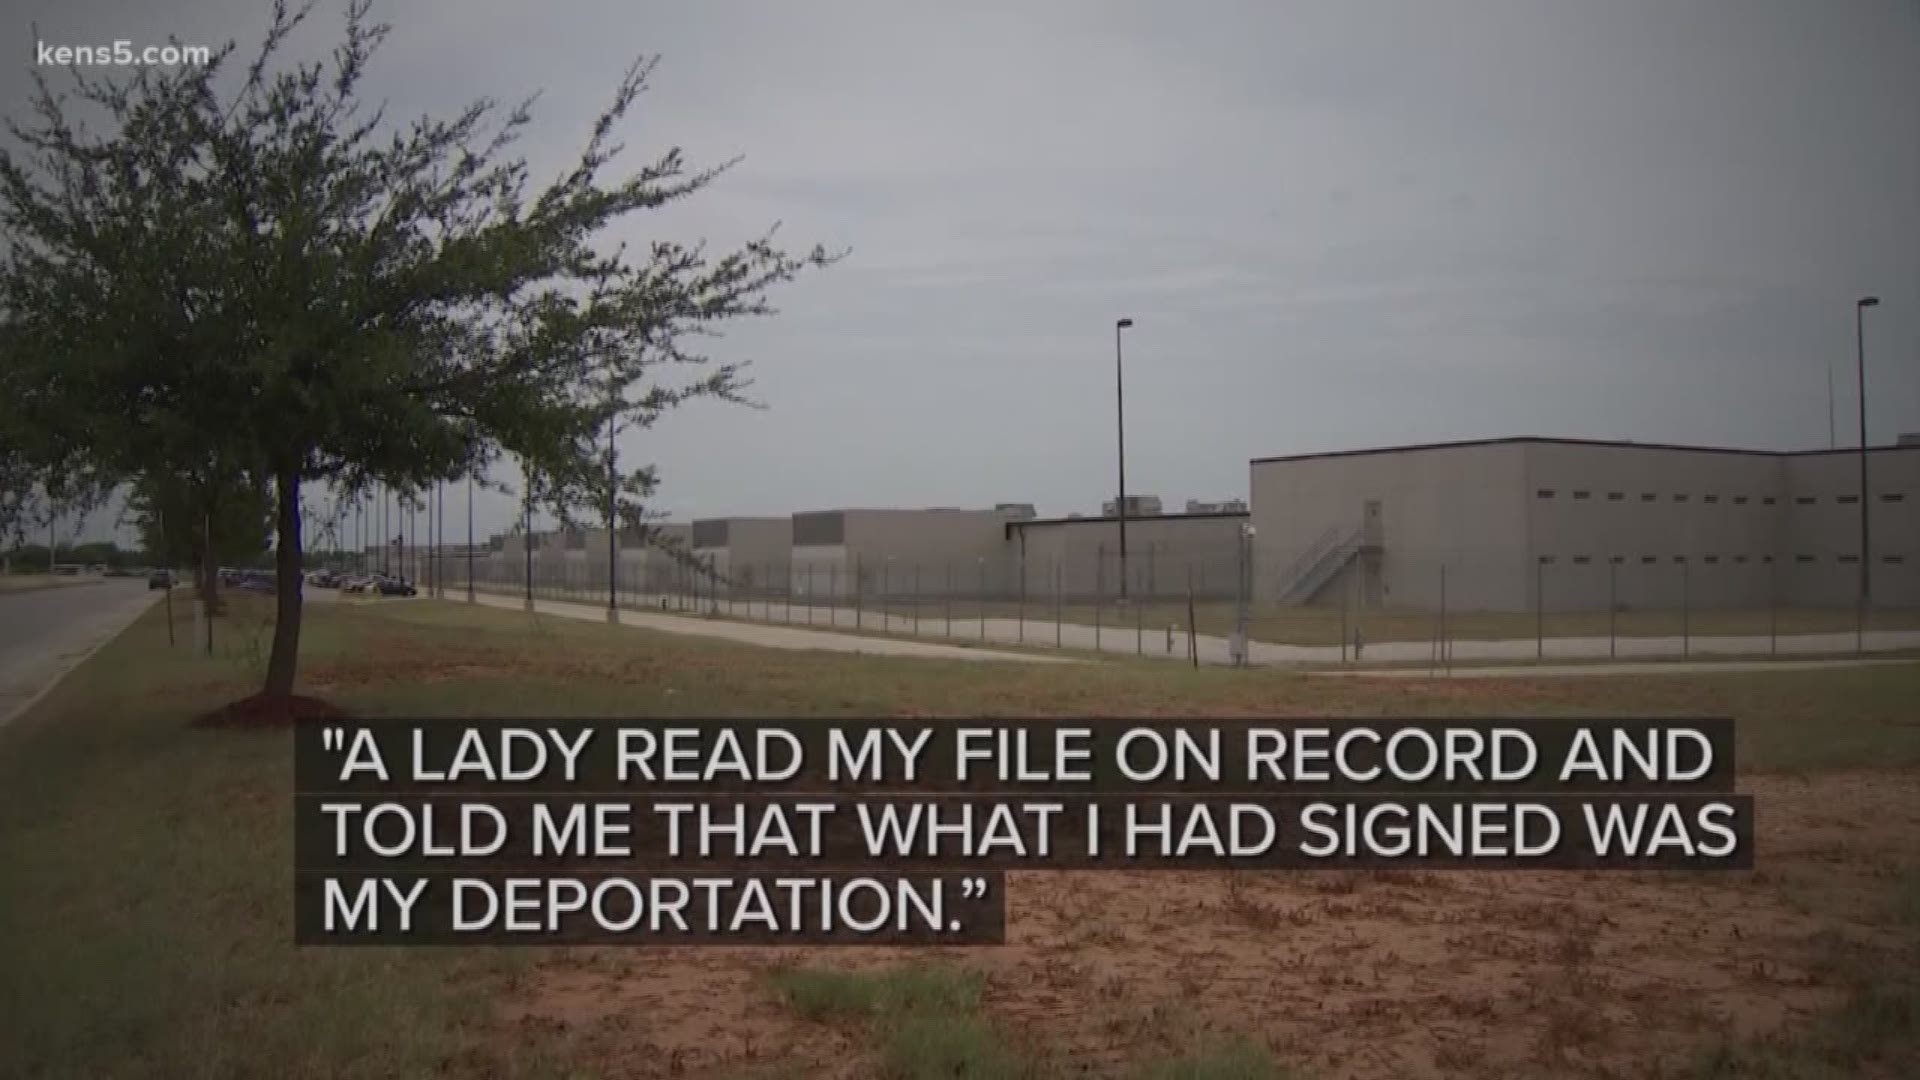 A Honduran mother says that she was fooled into believing papers she signed were for reuniting her with her son but they were actually deportation papers.